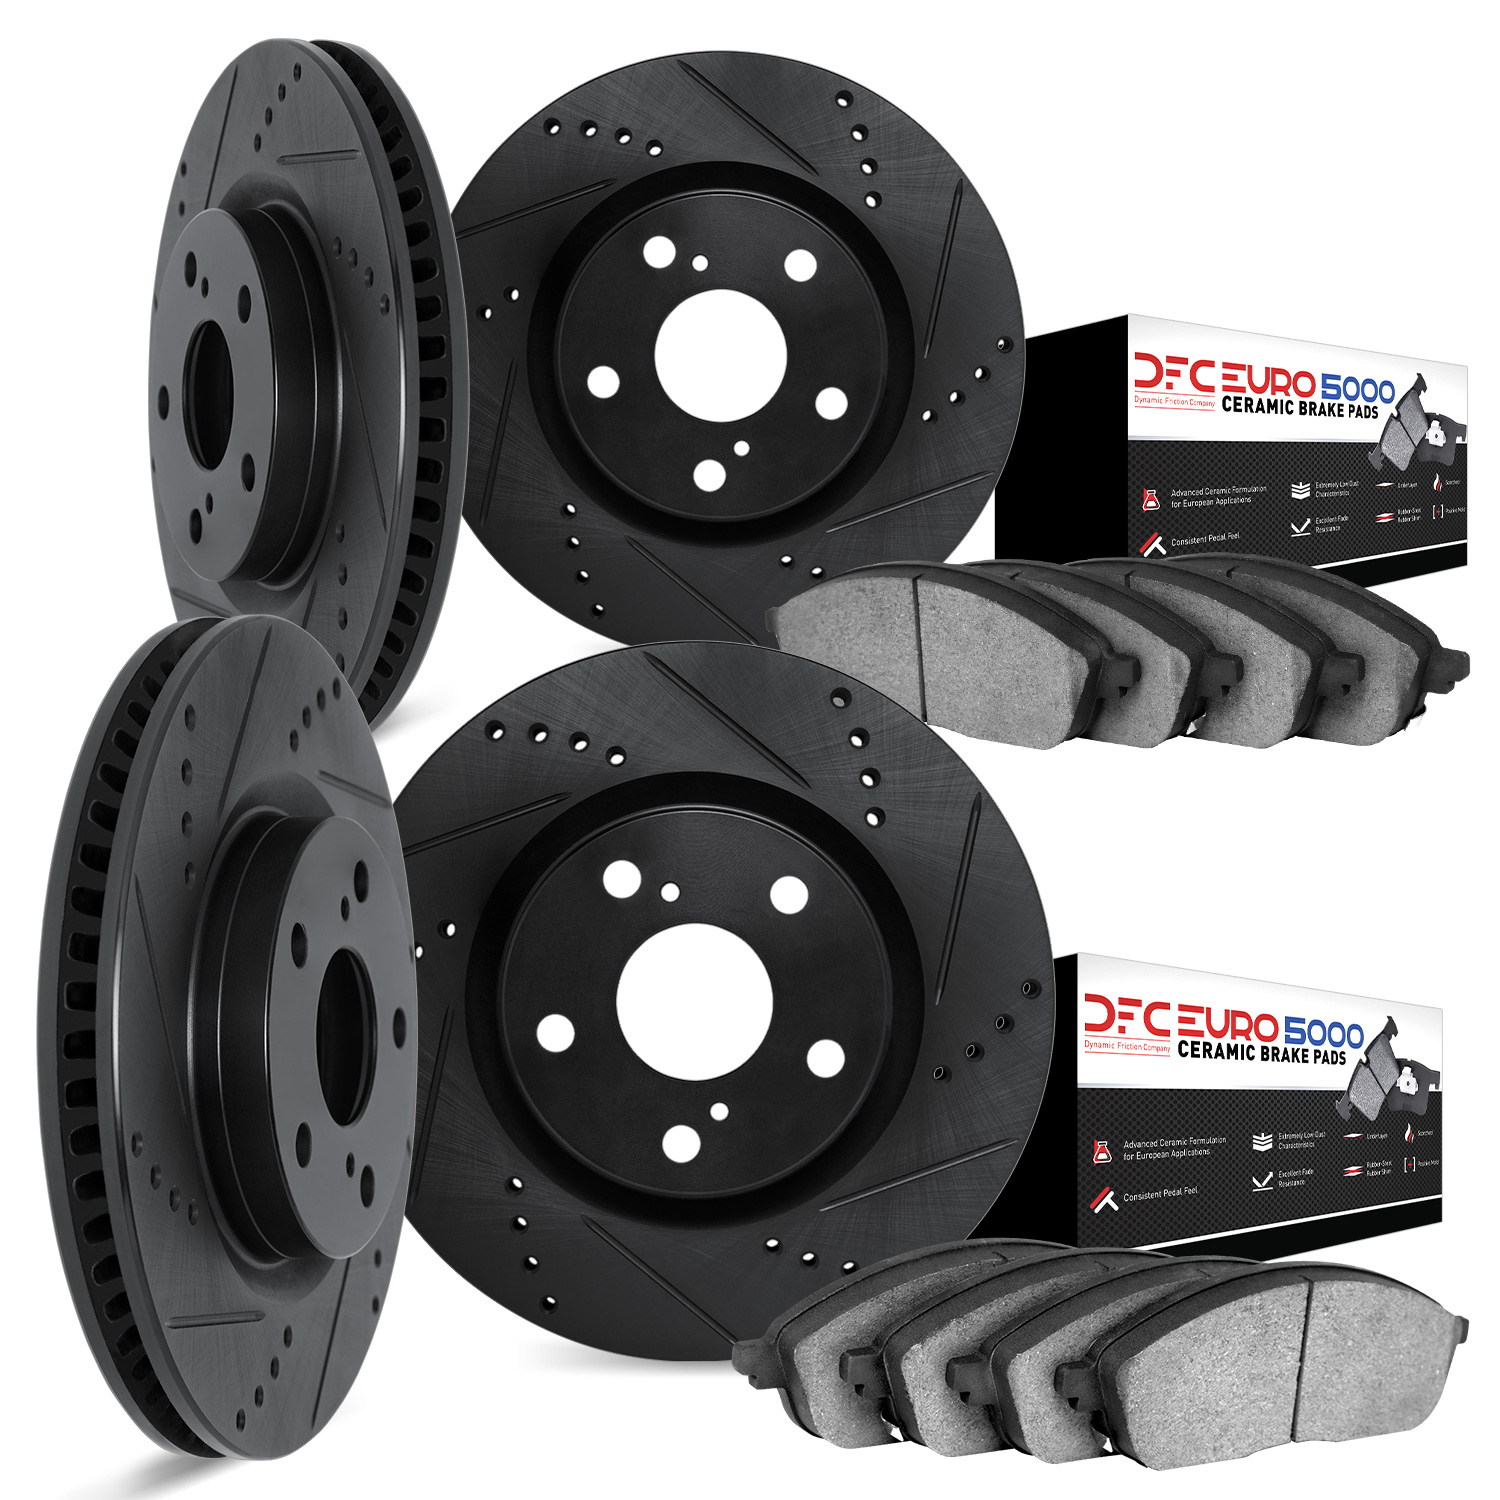 8604-31010 Drilled/Slotted Brake Rotors w/5000 Euro Ceramic Brake Pads Kit [Black], 1997-2000 BMW, Position: Front and Rear